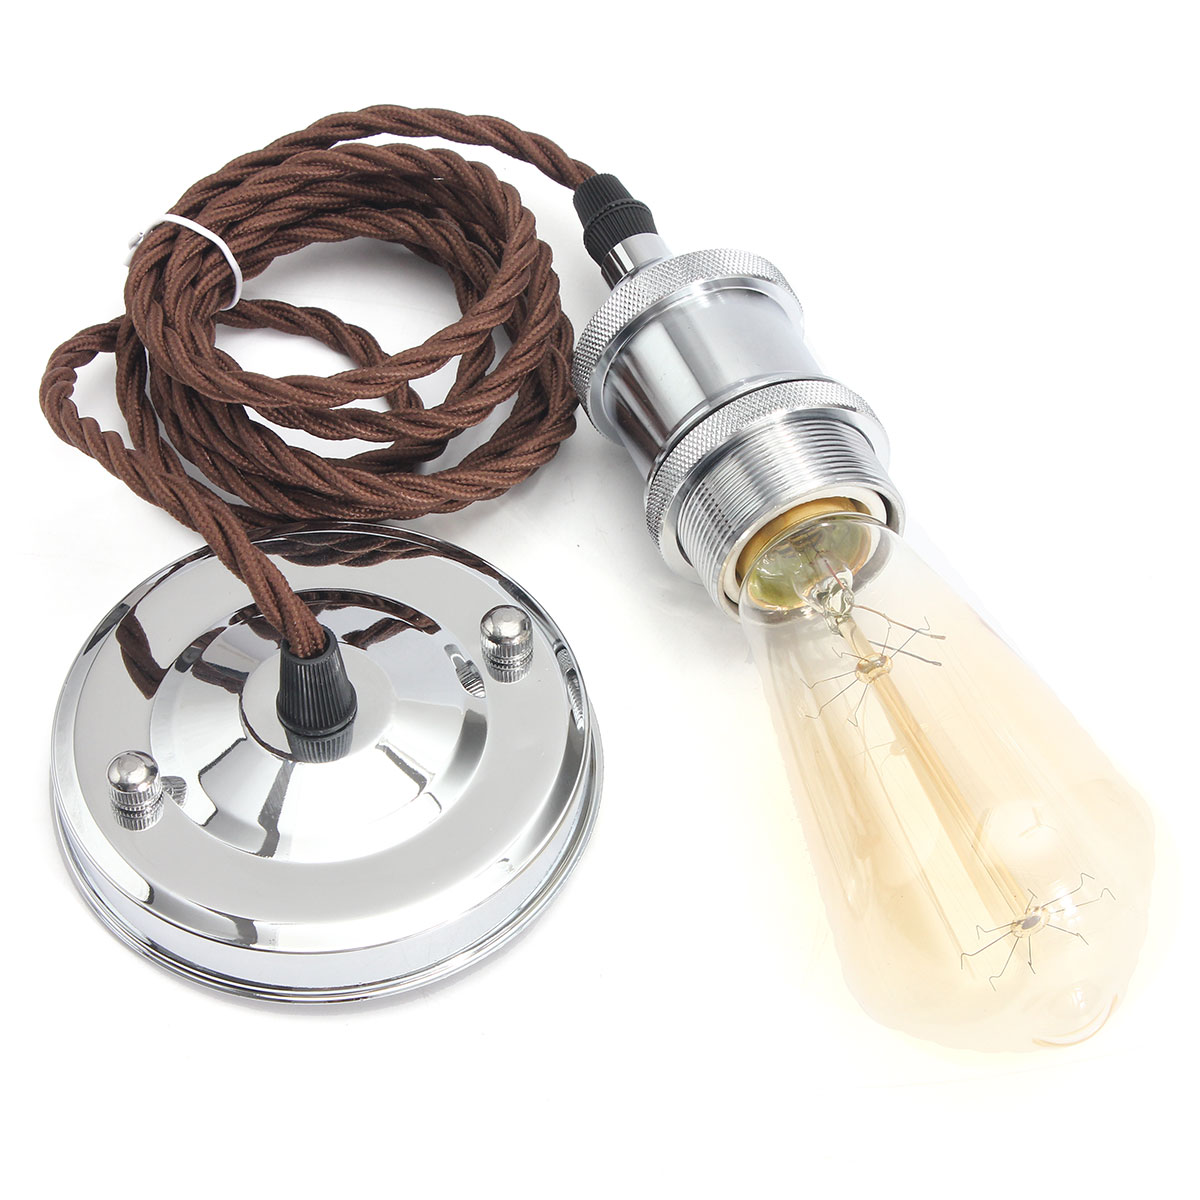 KINGSO-110V-220V-600W-Vintage-Lamp-Holder-Ceiling-Canopy-and-Copper-Socket-with-2M-Wire-1894180-6